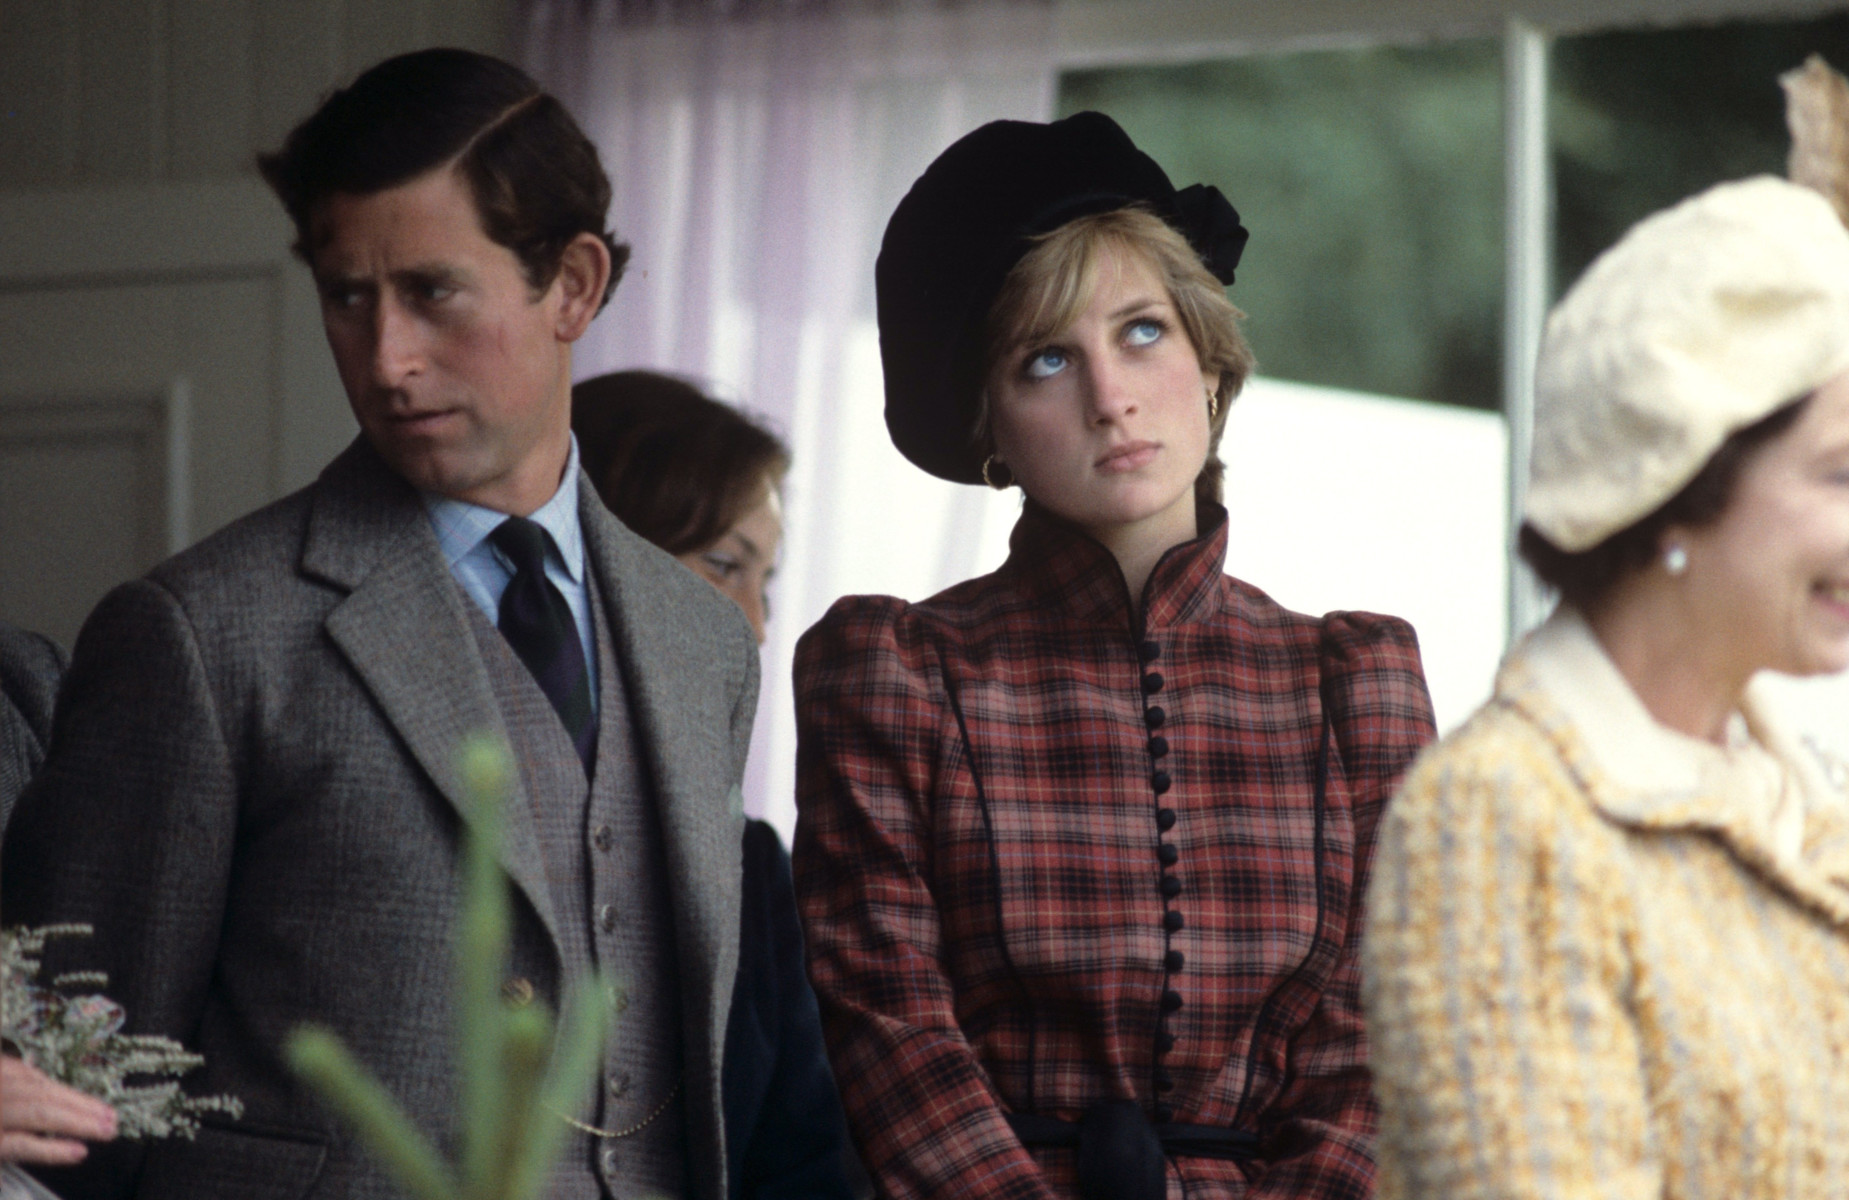 Diana discussed her relationship with Princes Charles in the interview